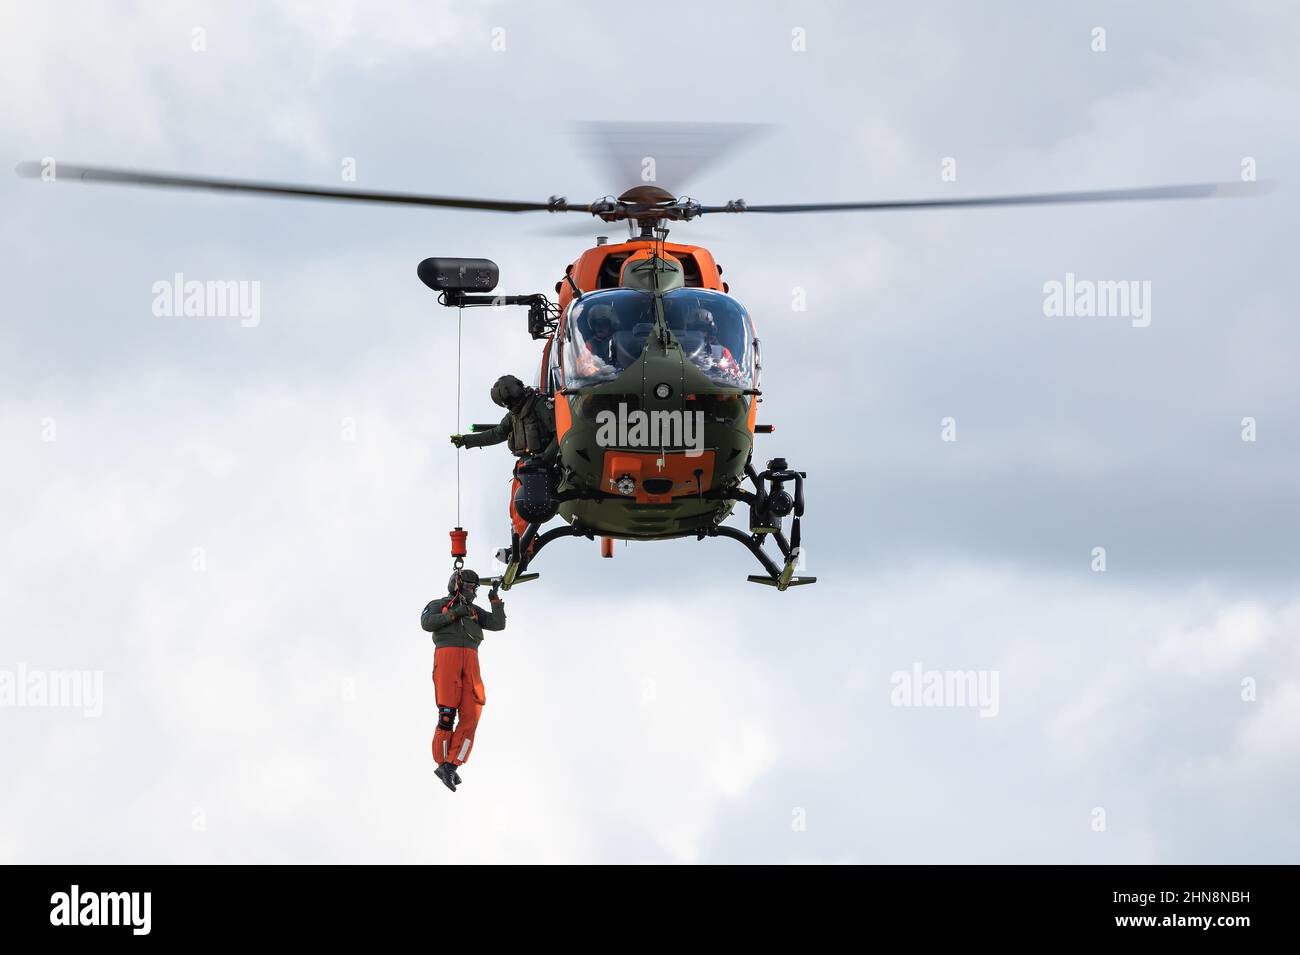 An Airbus H145M search and rescue helicopter of the German Army Aviation Corps. Stock Photo